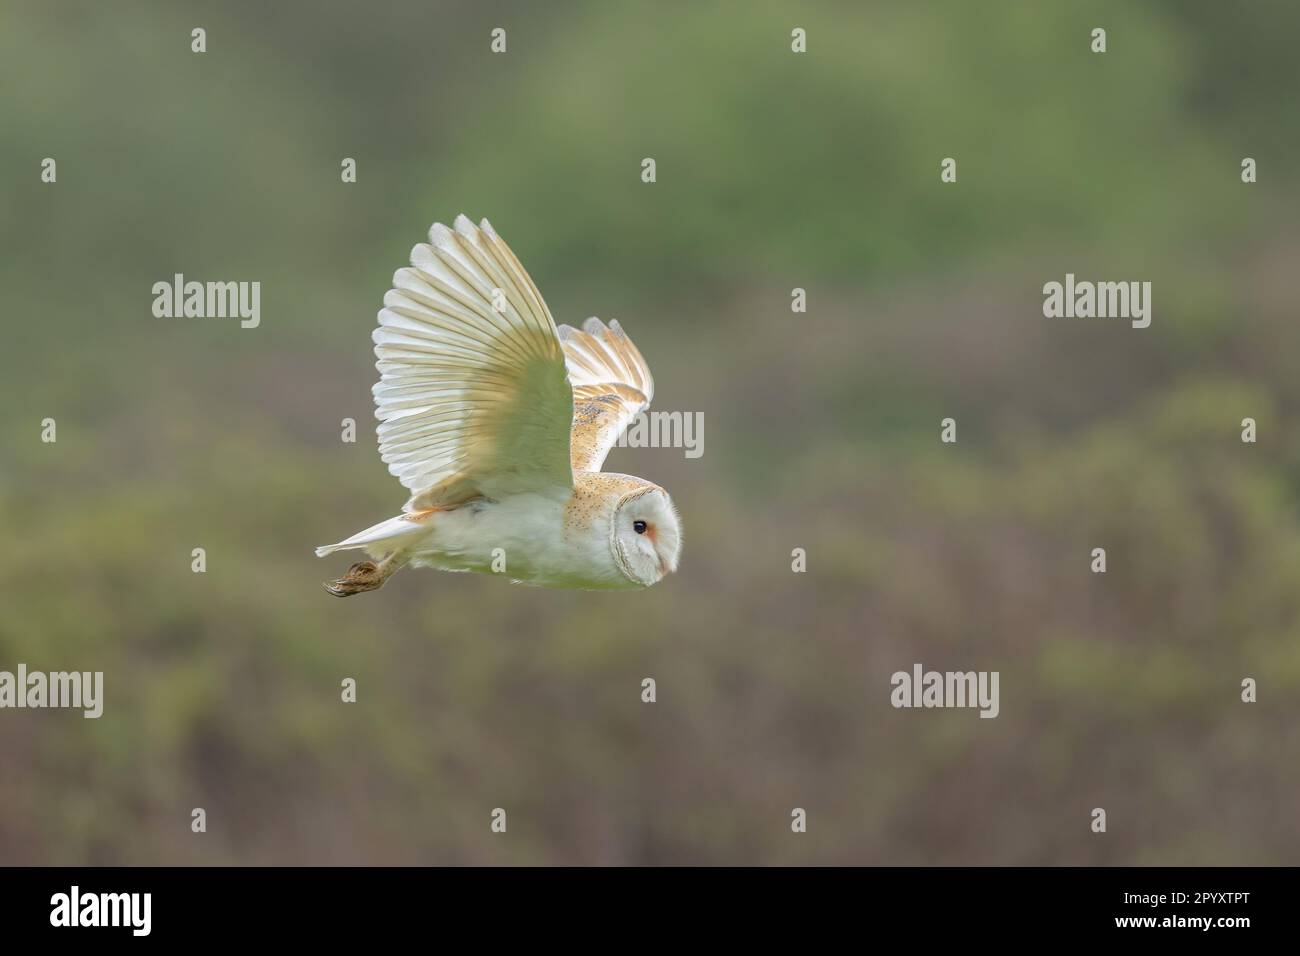 A majestic Barn Owl soaring against the lush greenery of trees and ...